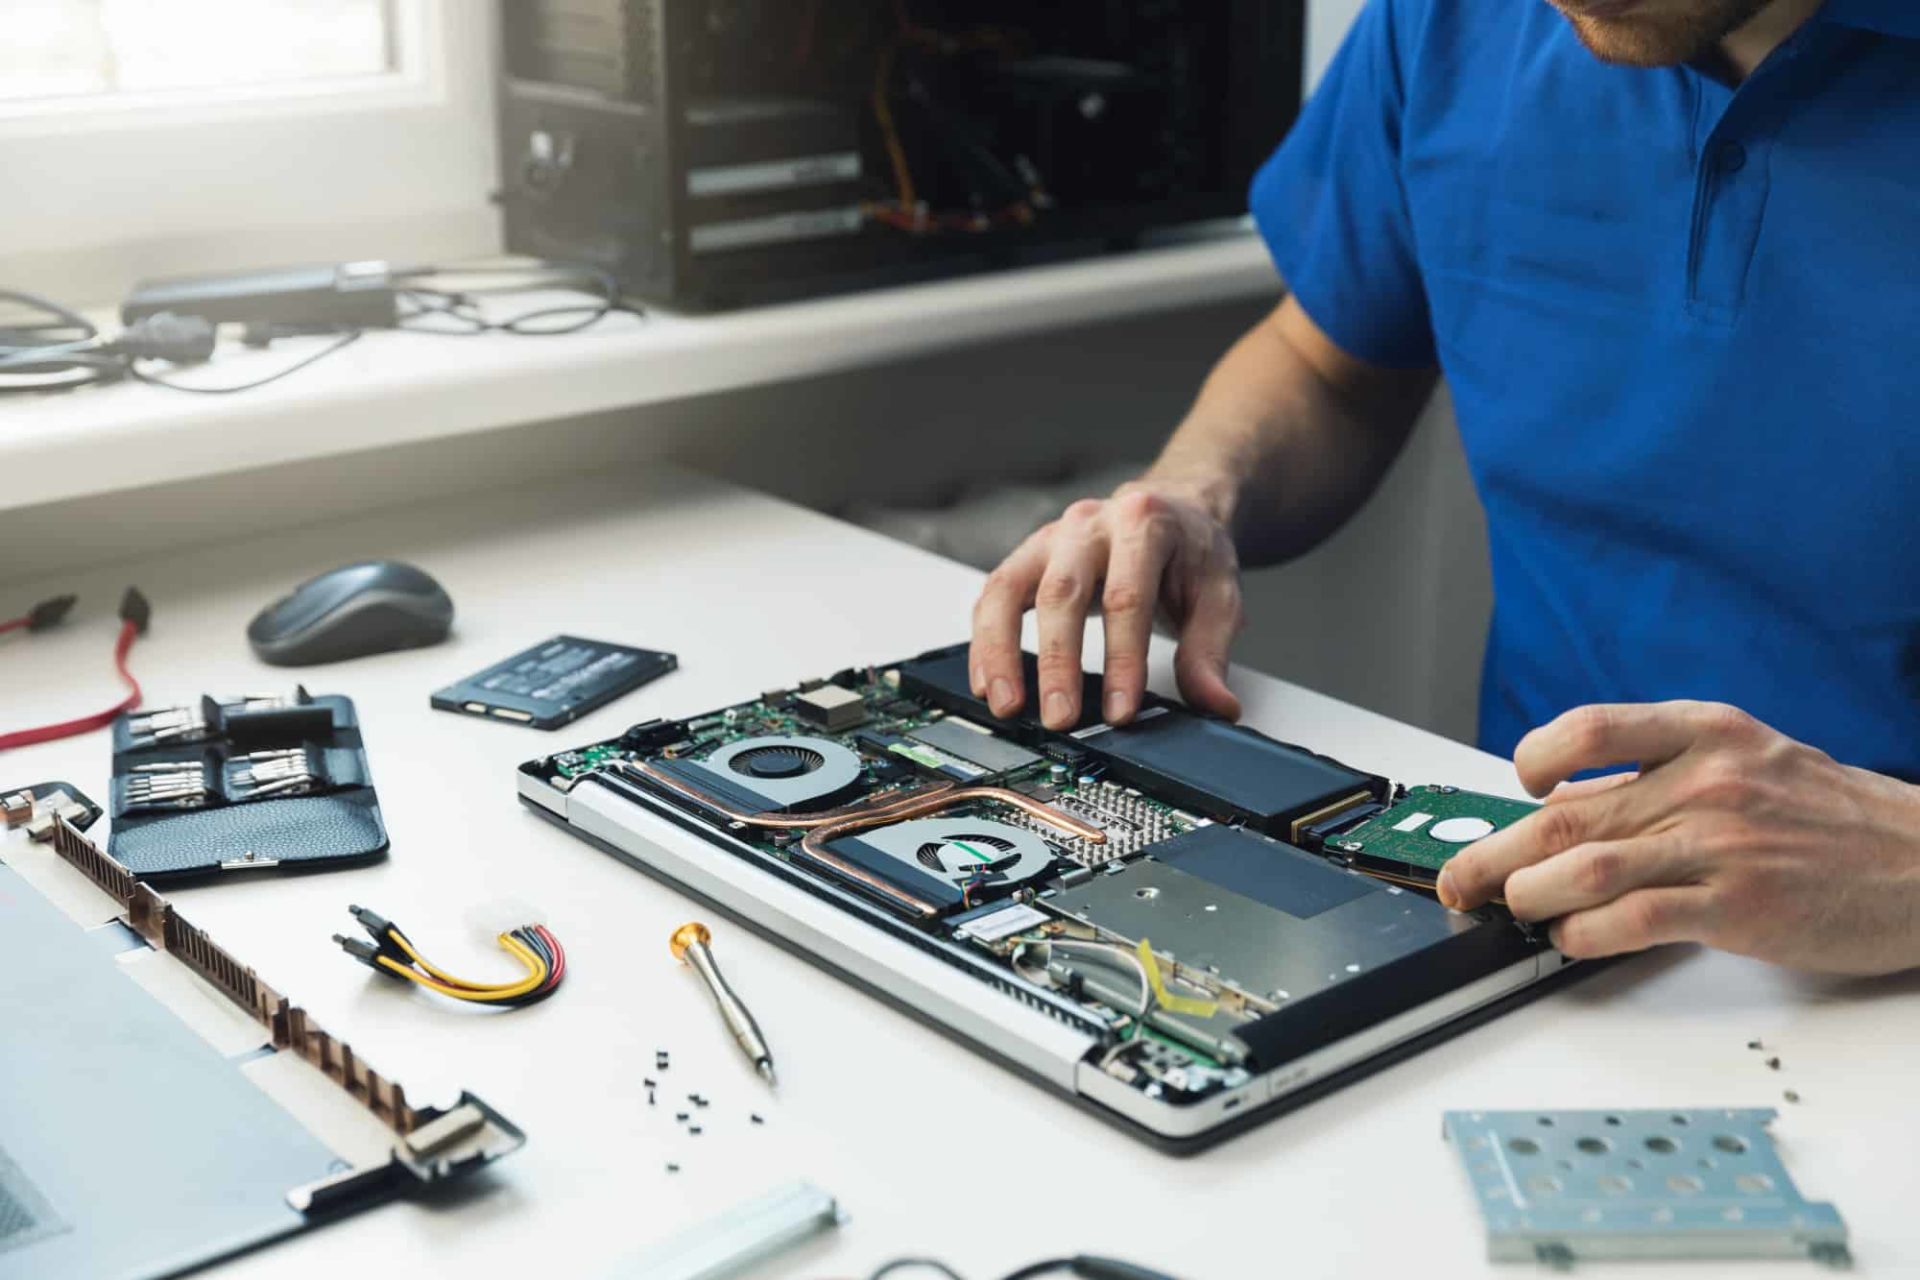 How to Choose the Right Computer Repair Tech the First Time